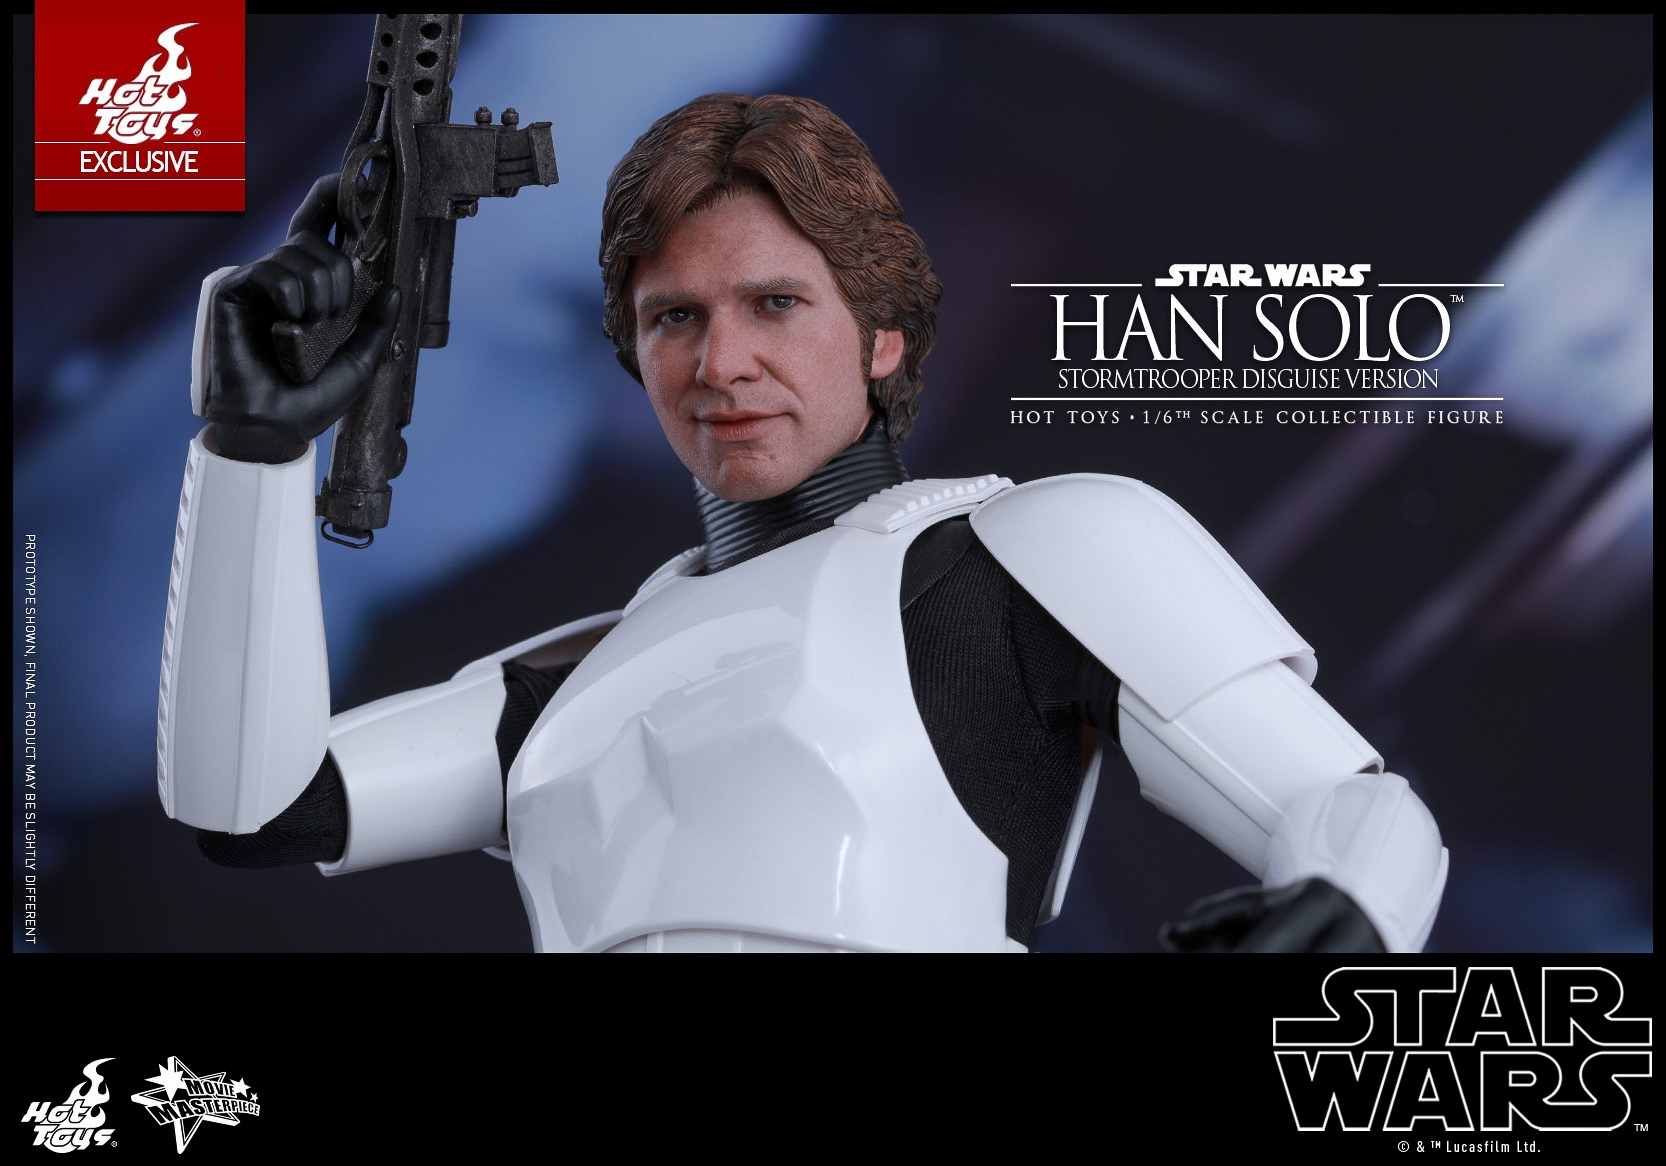 Hot-Toys-MMS418-Star-Wars-Han-Solo-Stormtrooper-Disguise-008.jpg